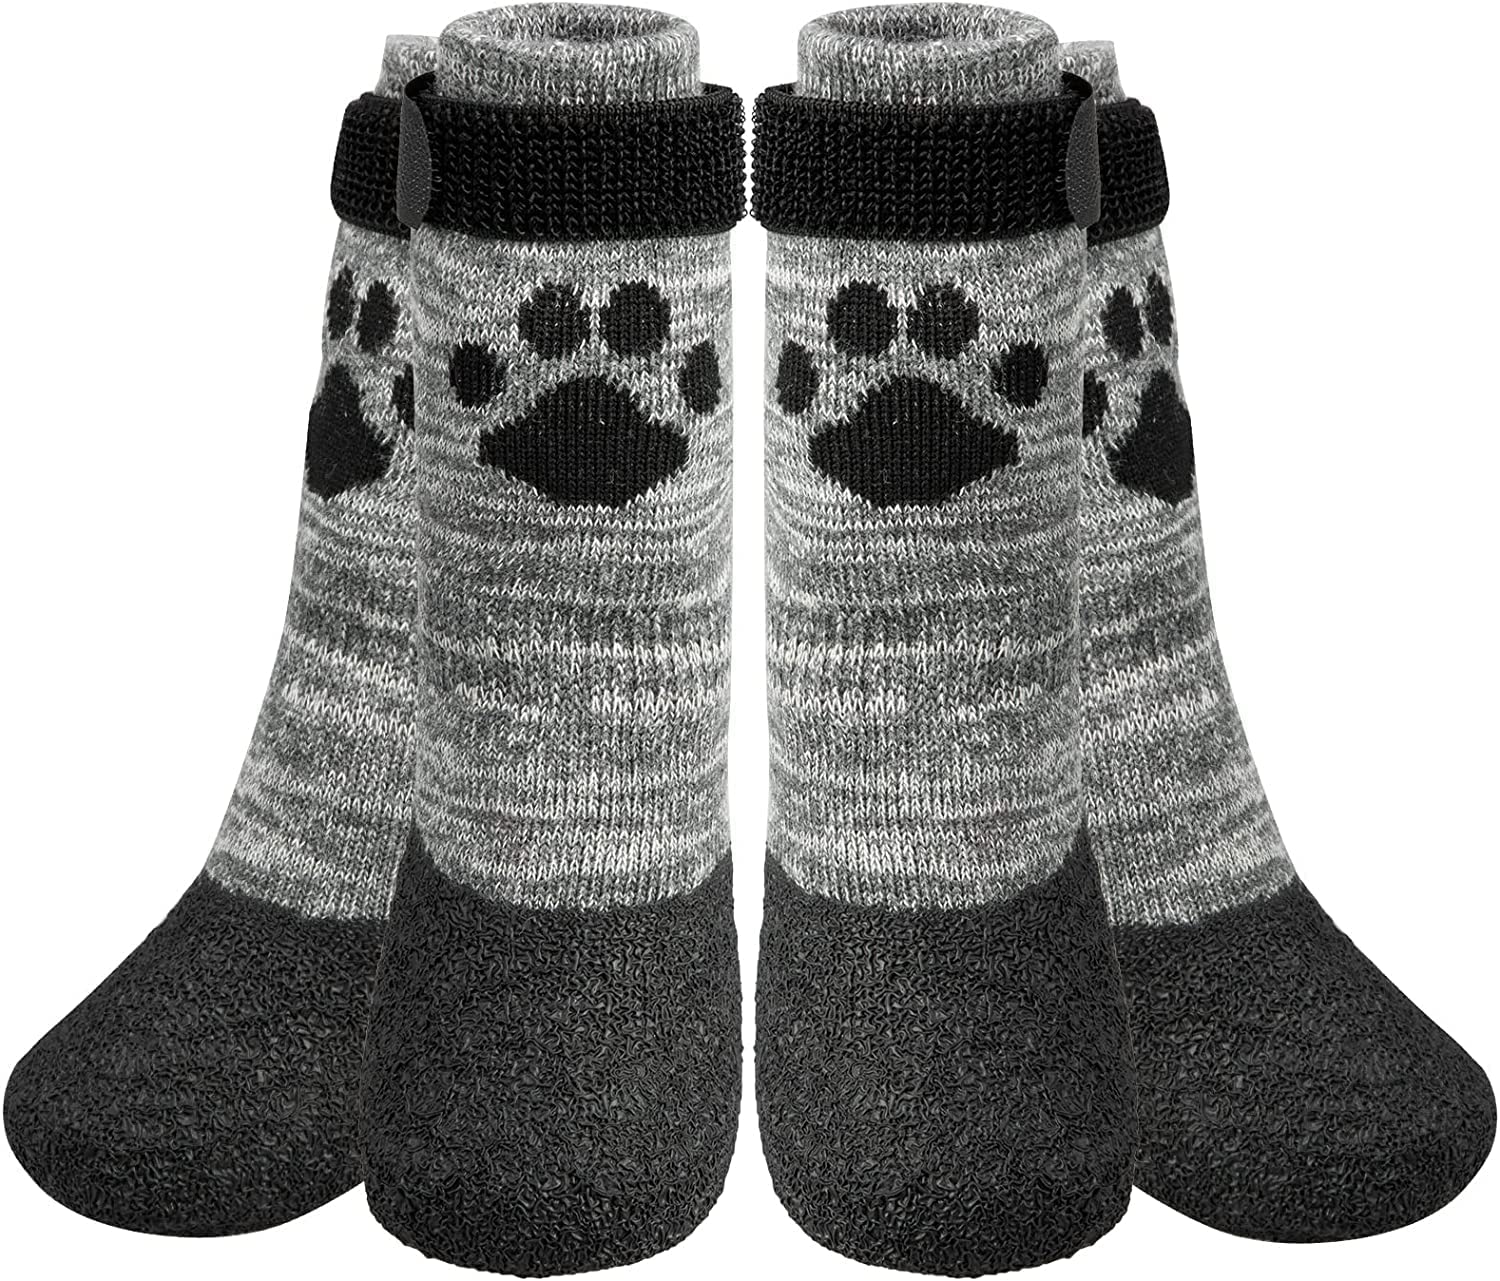 PUPTECK Non Slip Dog Socks for Licking with Grippers, Dog Shoes for  Hardwood Floors, Winter Booties